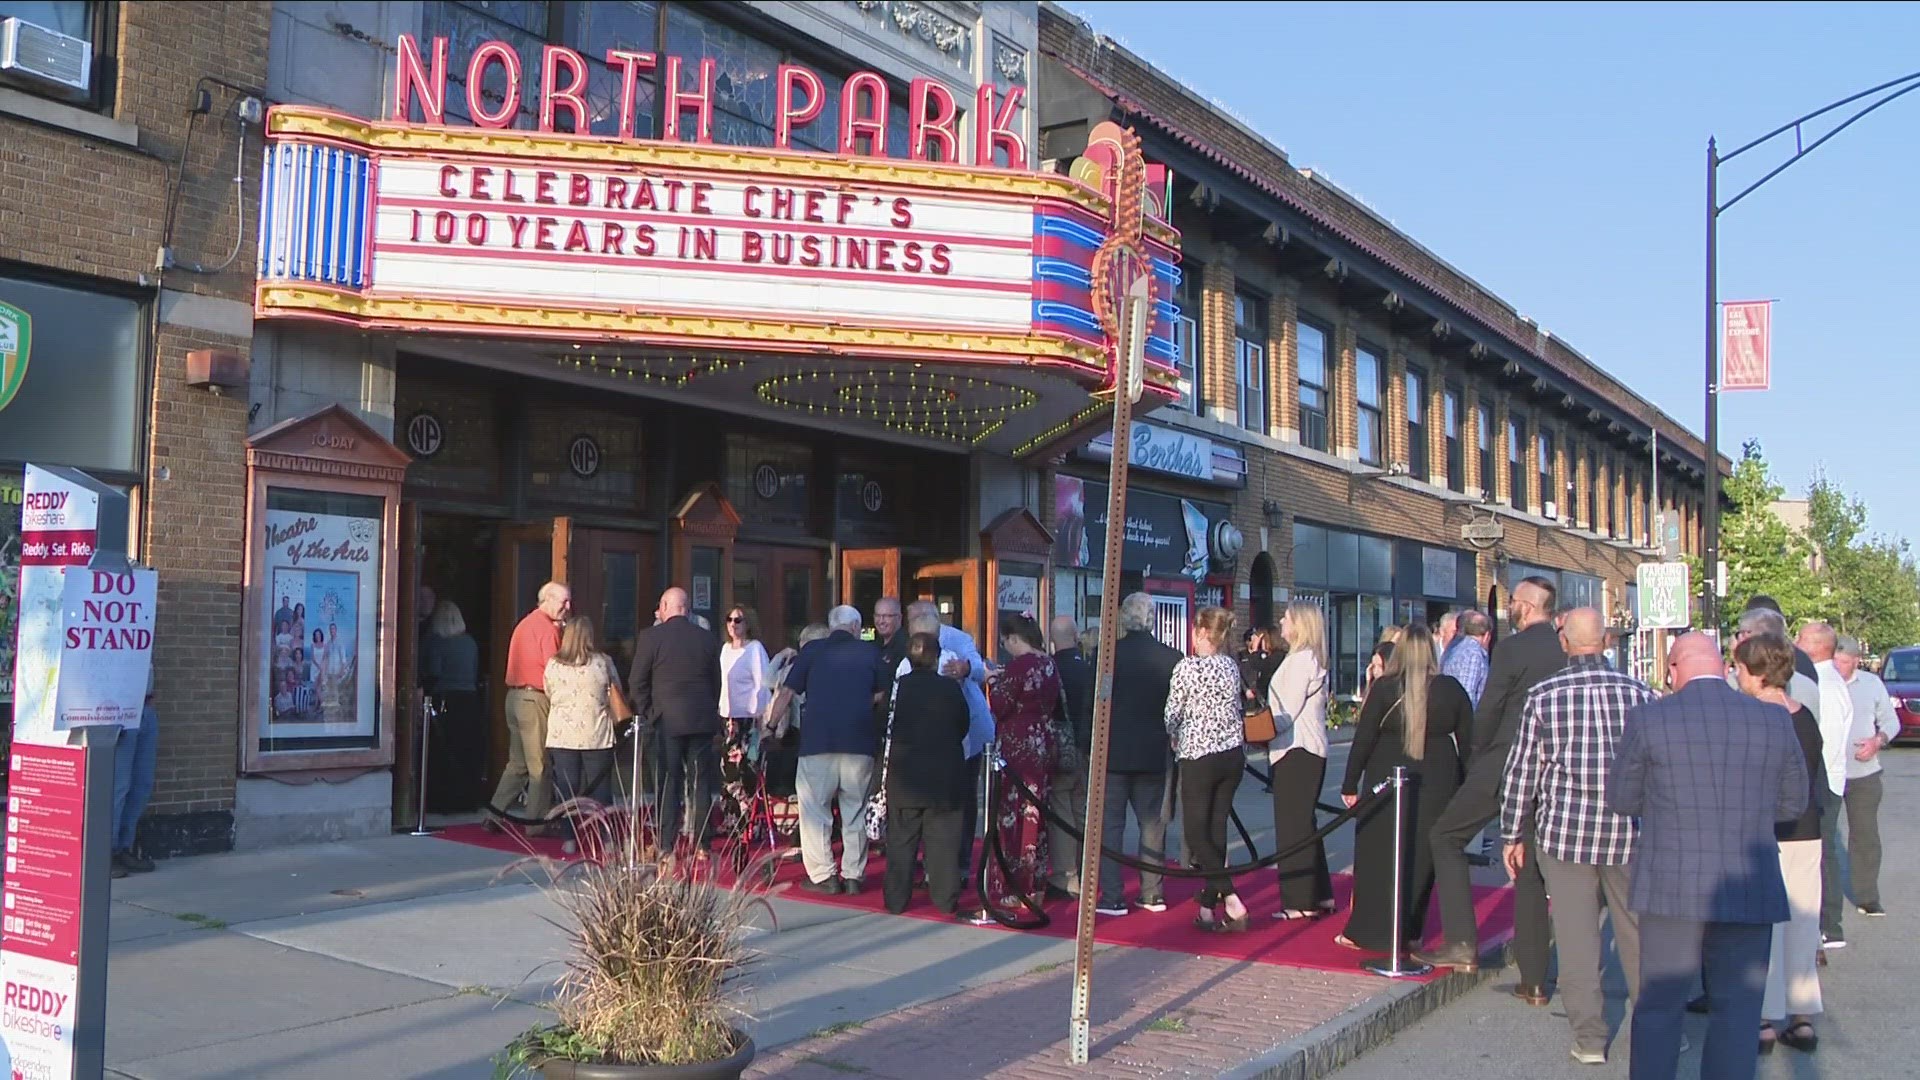 A screening of a documentary featuring the history of the well-known restaurant was held at the North Park Theater.